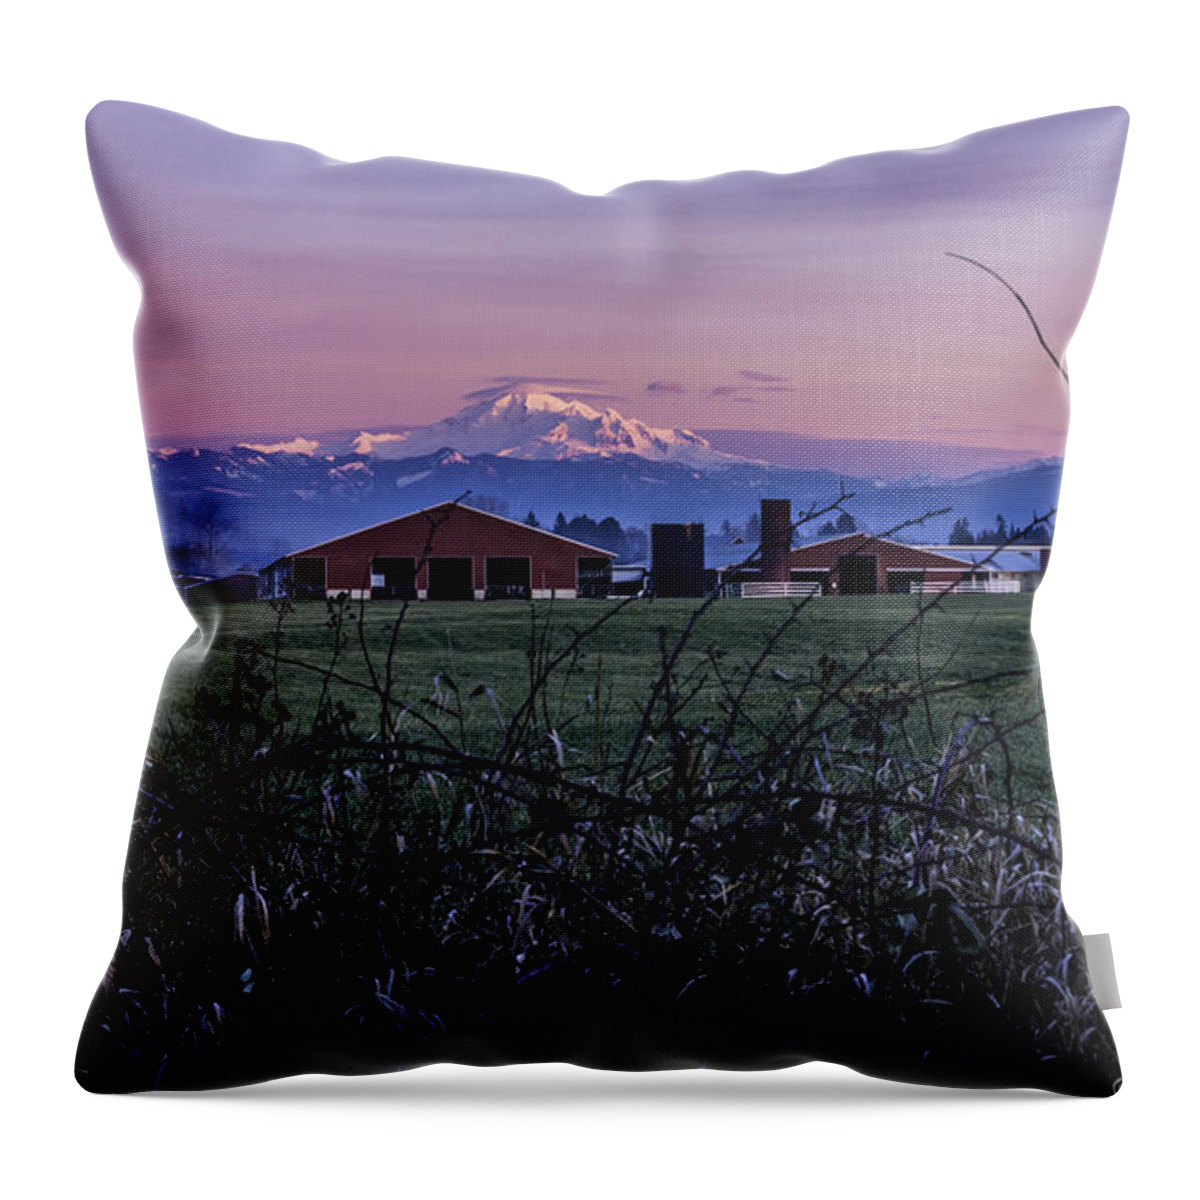 Sunset Throw Pillow featuring the photograph Dairy Farm Sunset by Mark Joseph